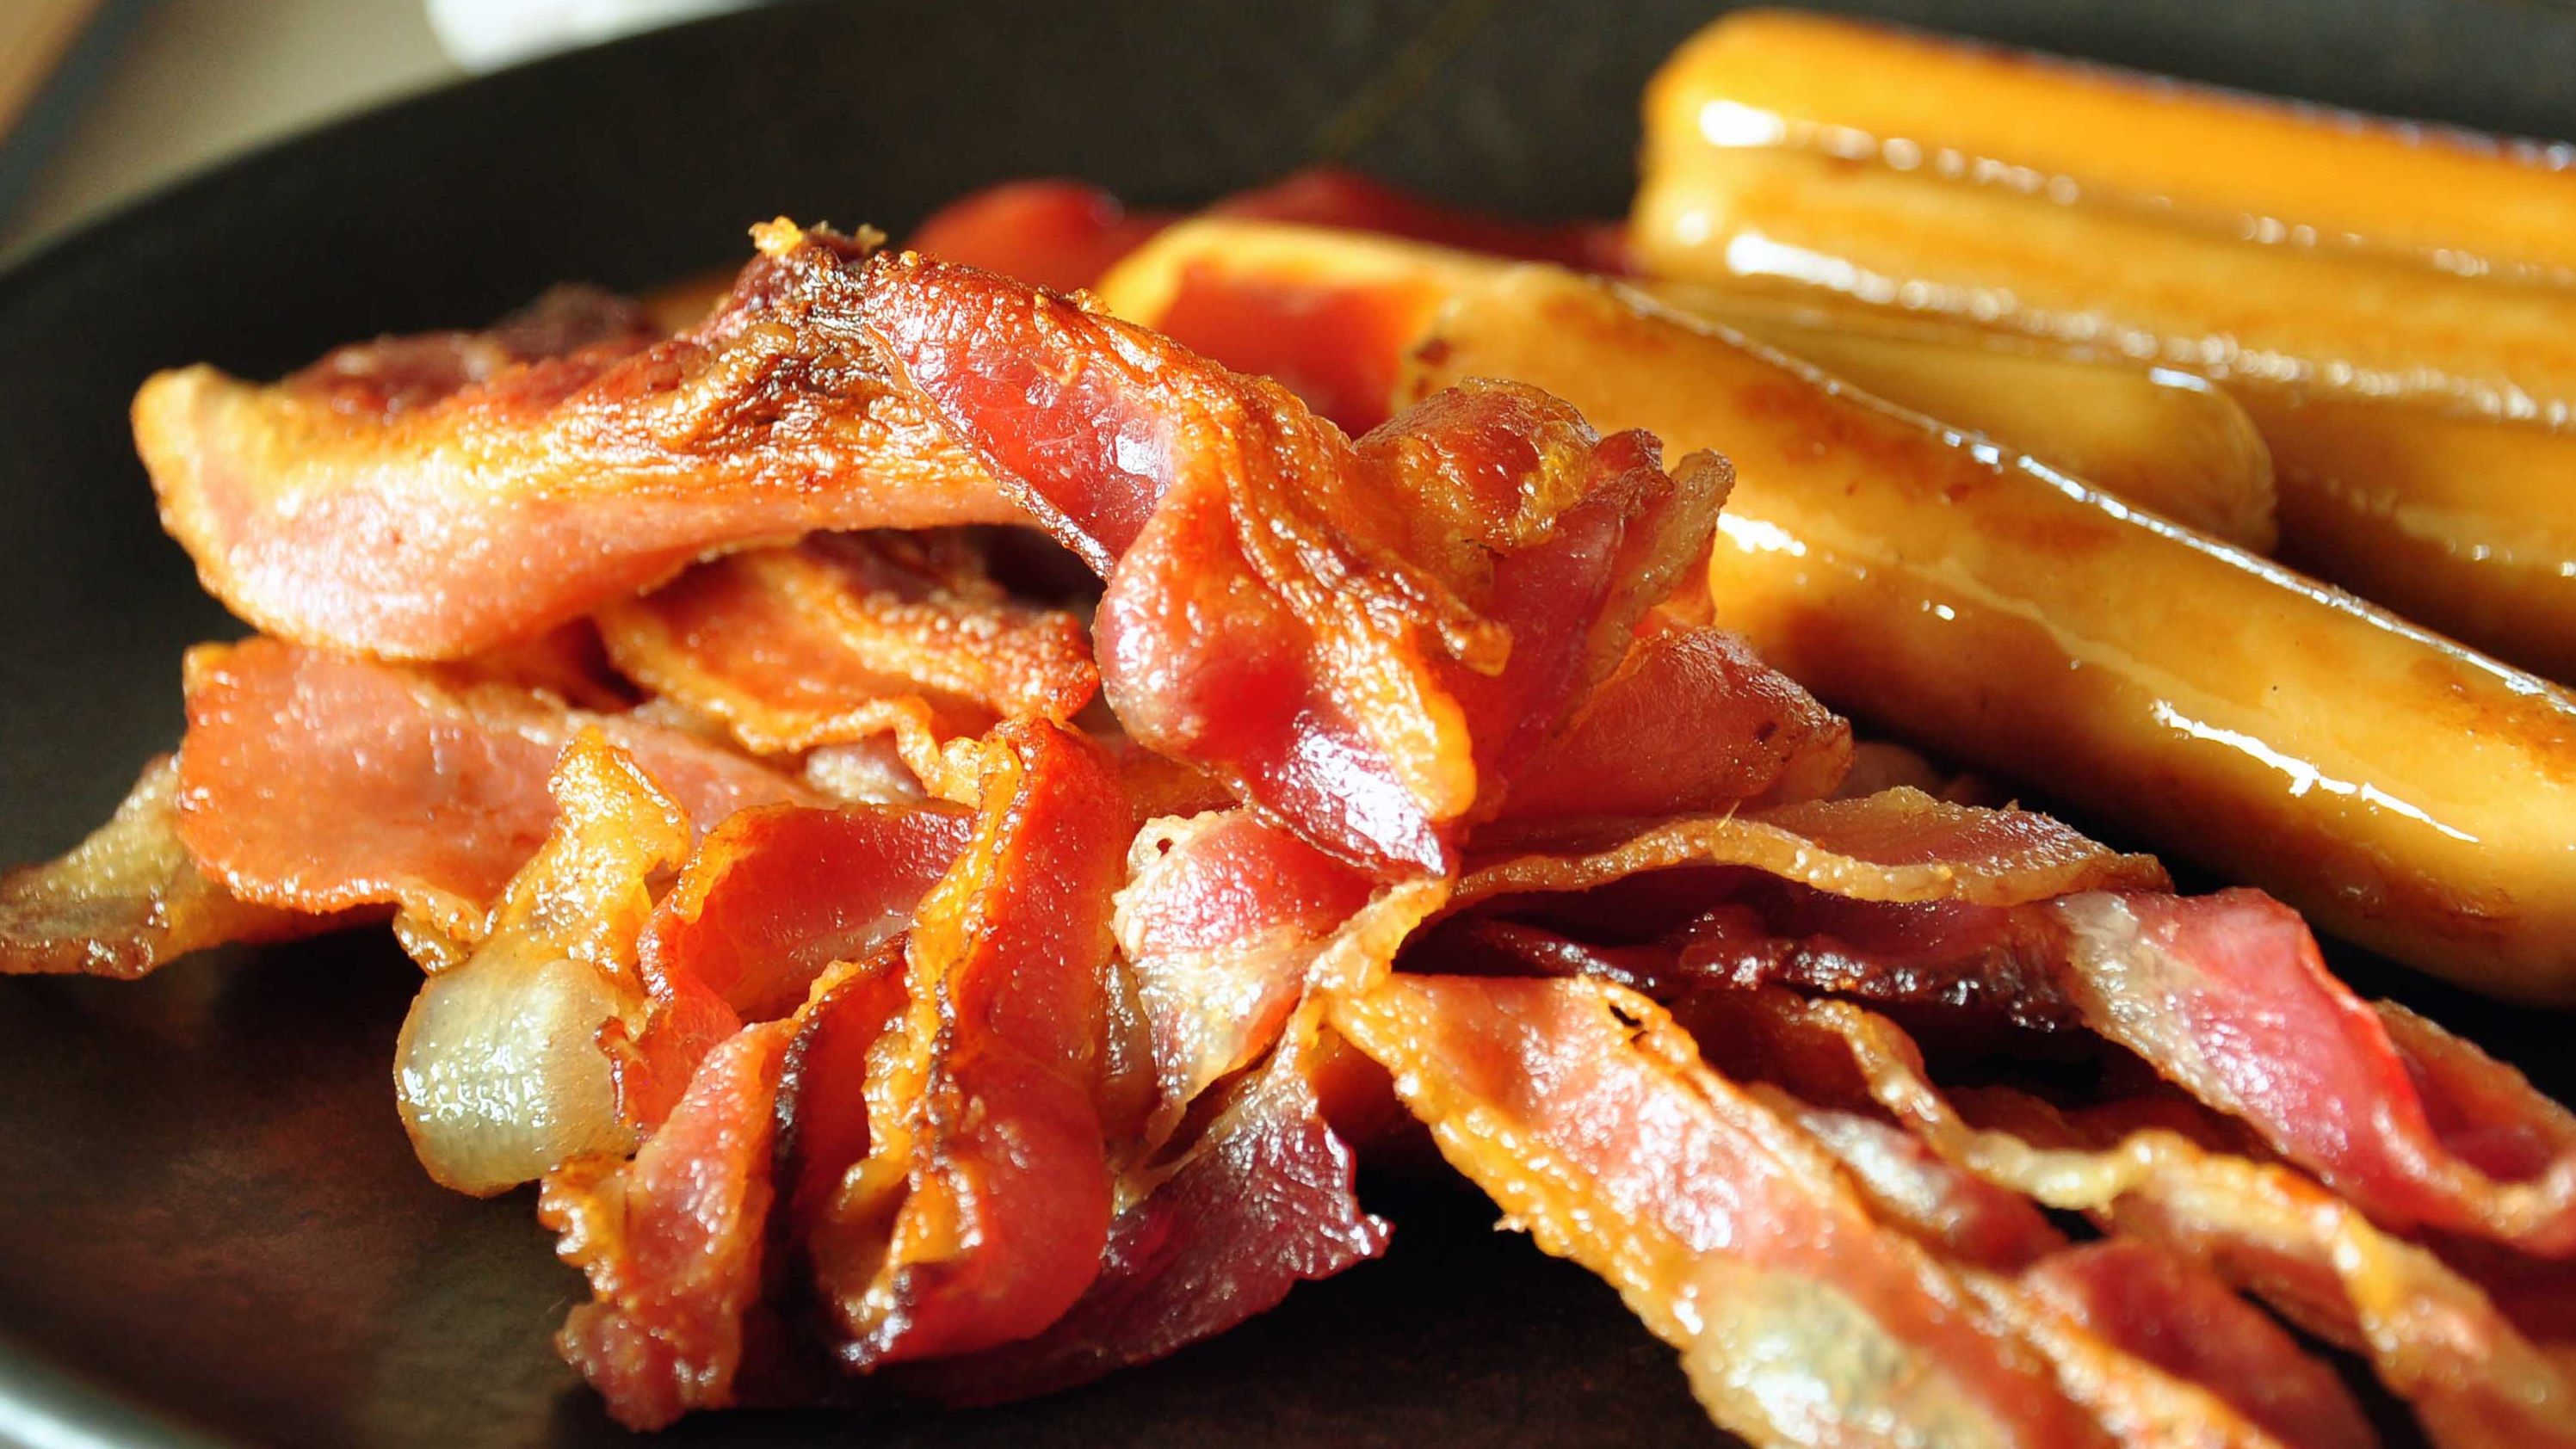 The price of bacon and sausages would increase dramatically with a meat tax